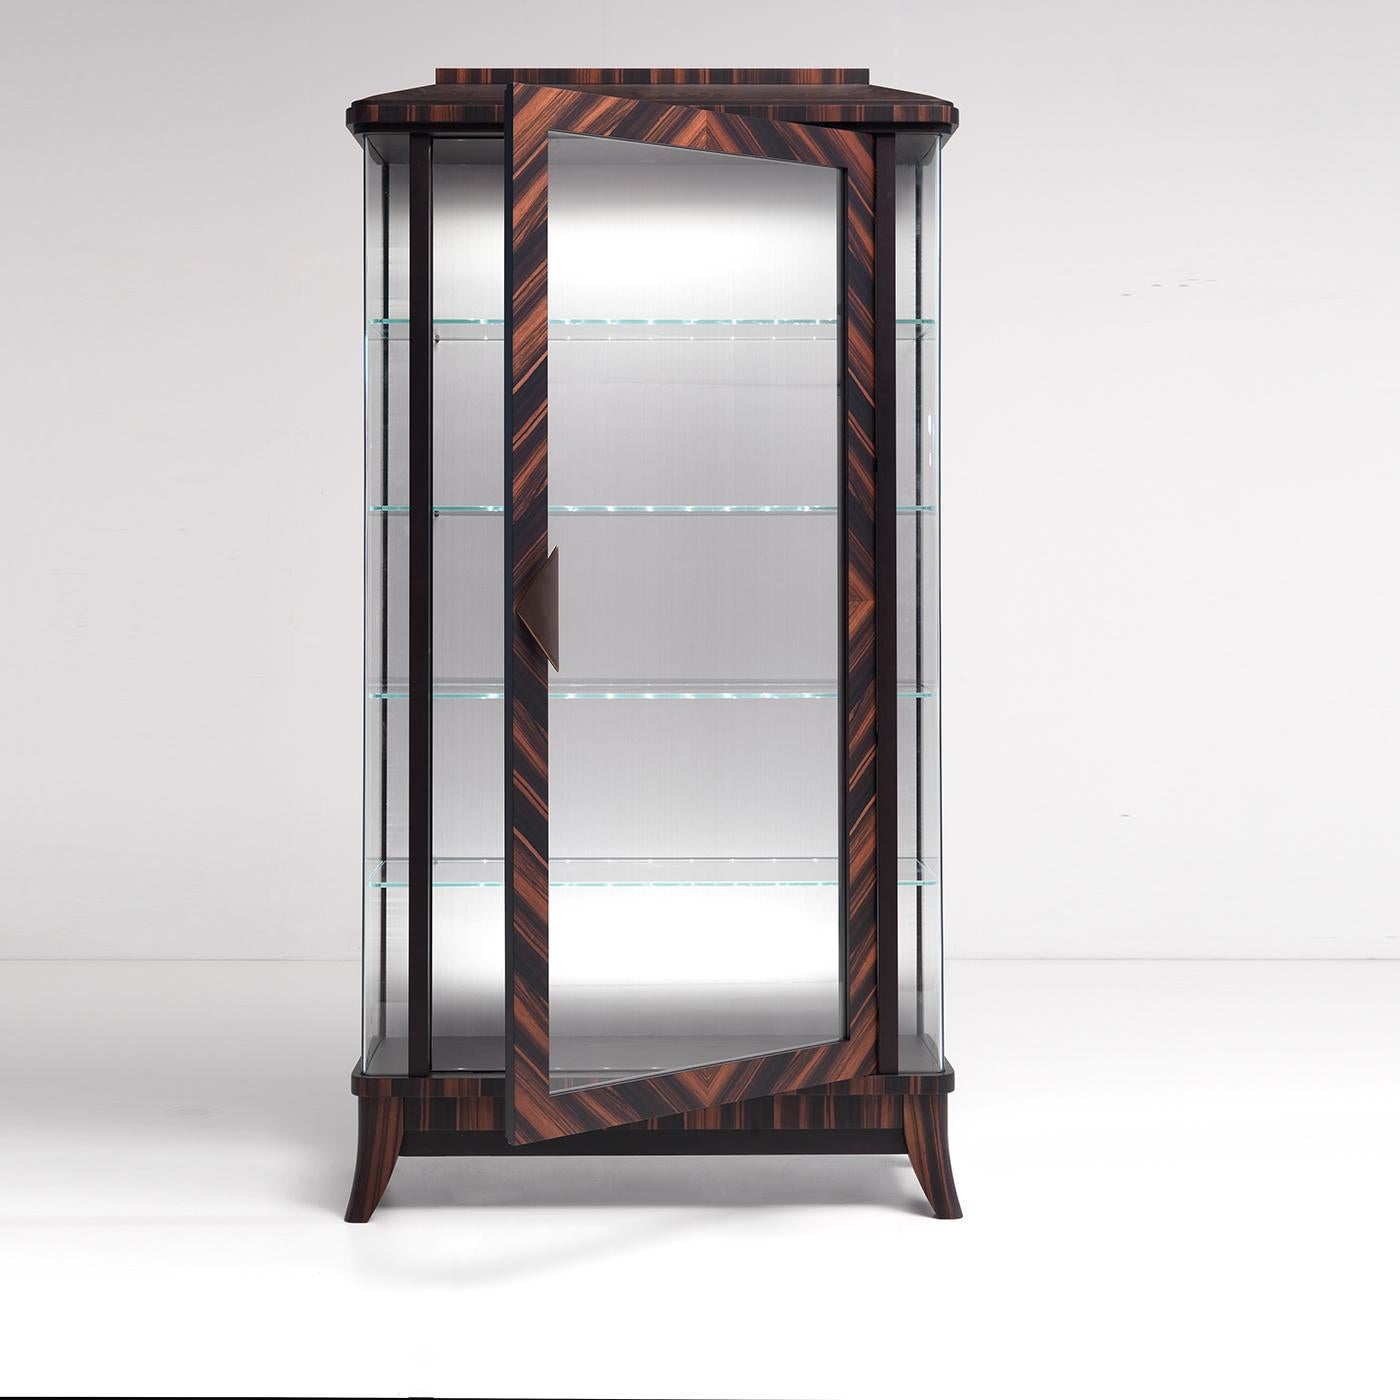 This striking display cabinet effortlessly merges modern and classic influences for a result of undeniable allure. Fashioned of Makassar ebony, the imposing frame stands on four curved feet and the single door in clear glass reveals the inner unit